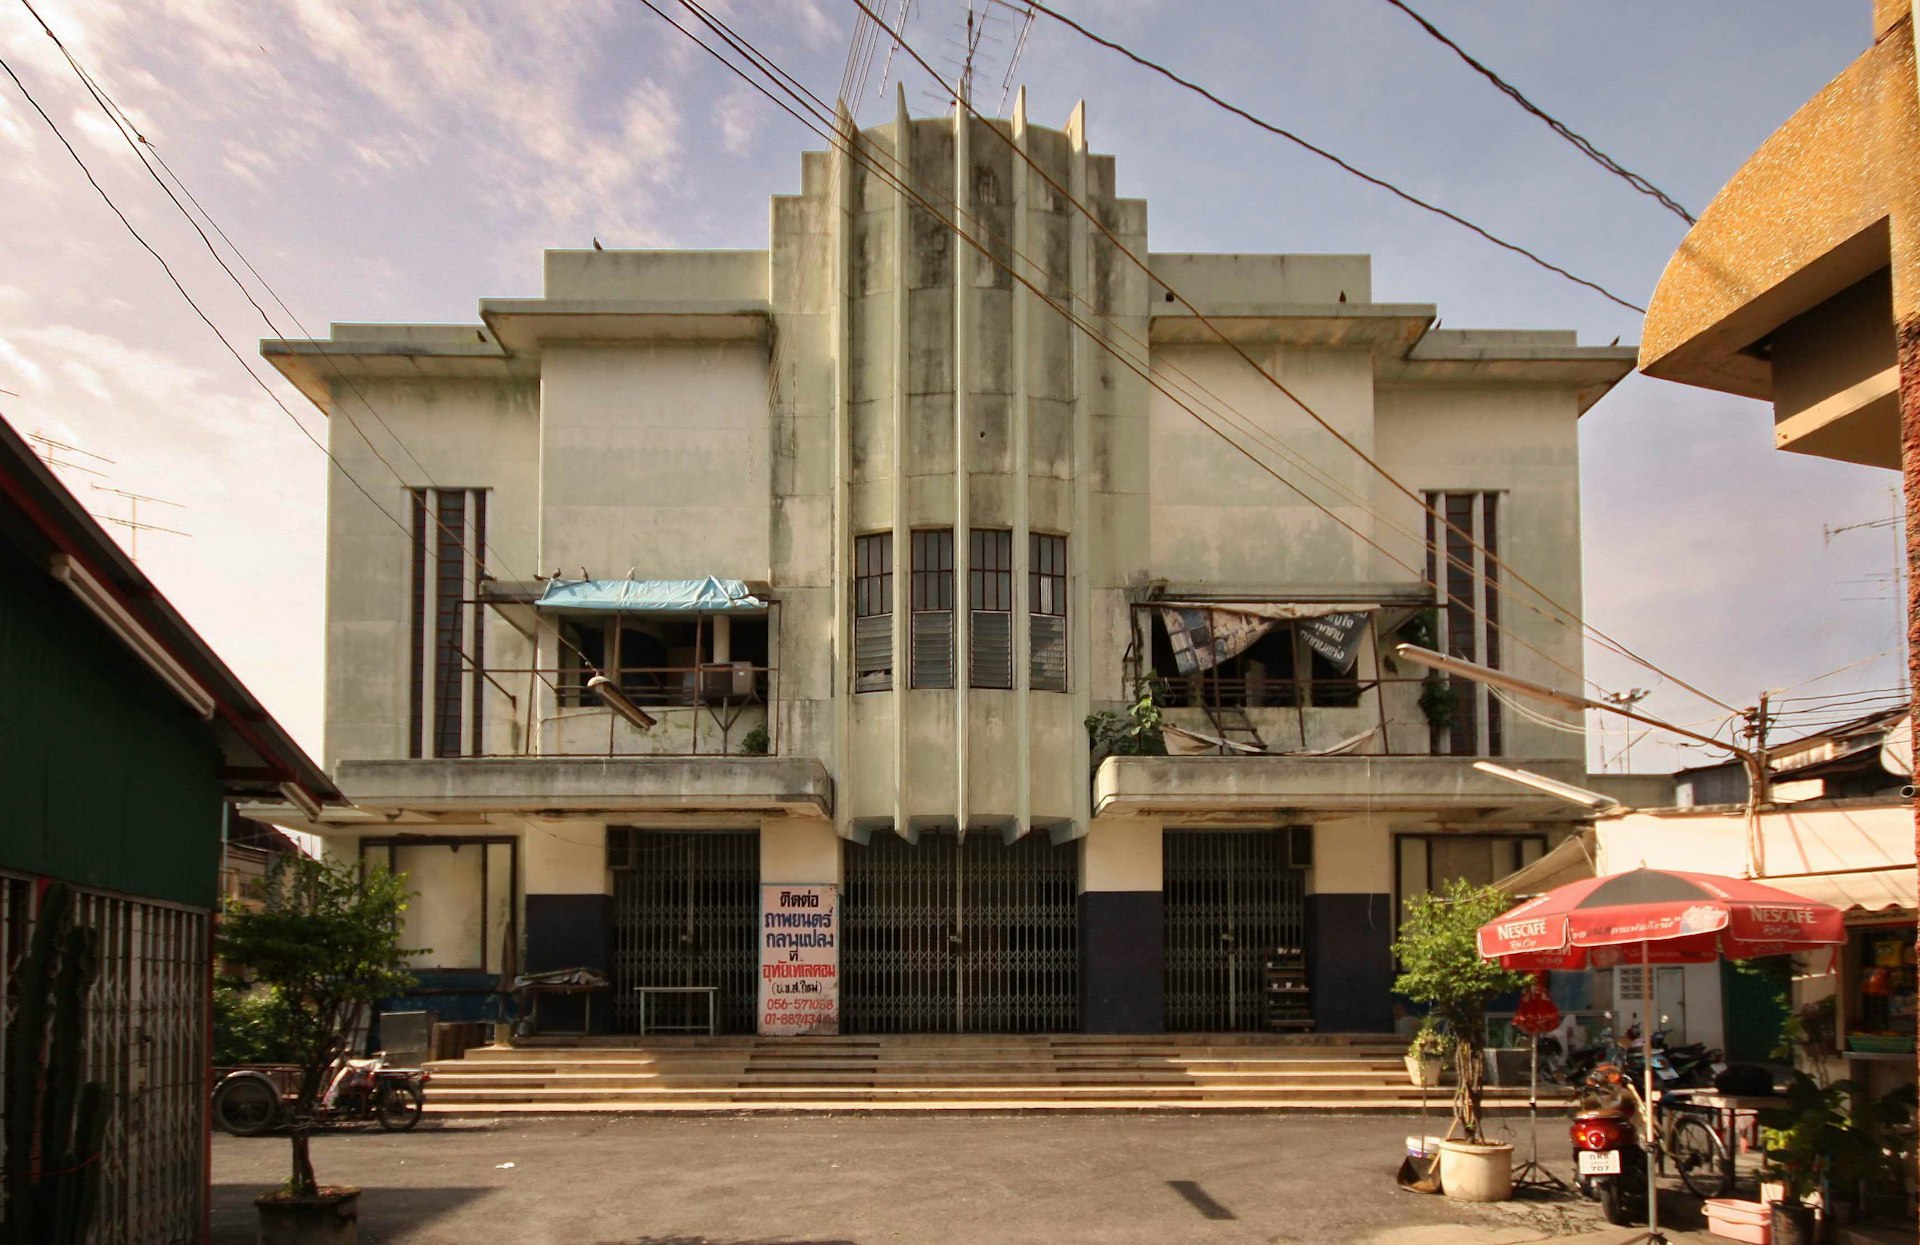 Photos of Thailand’s old abandoned cinemas